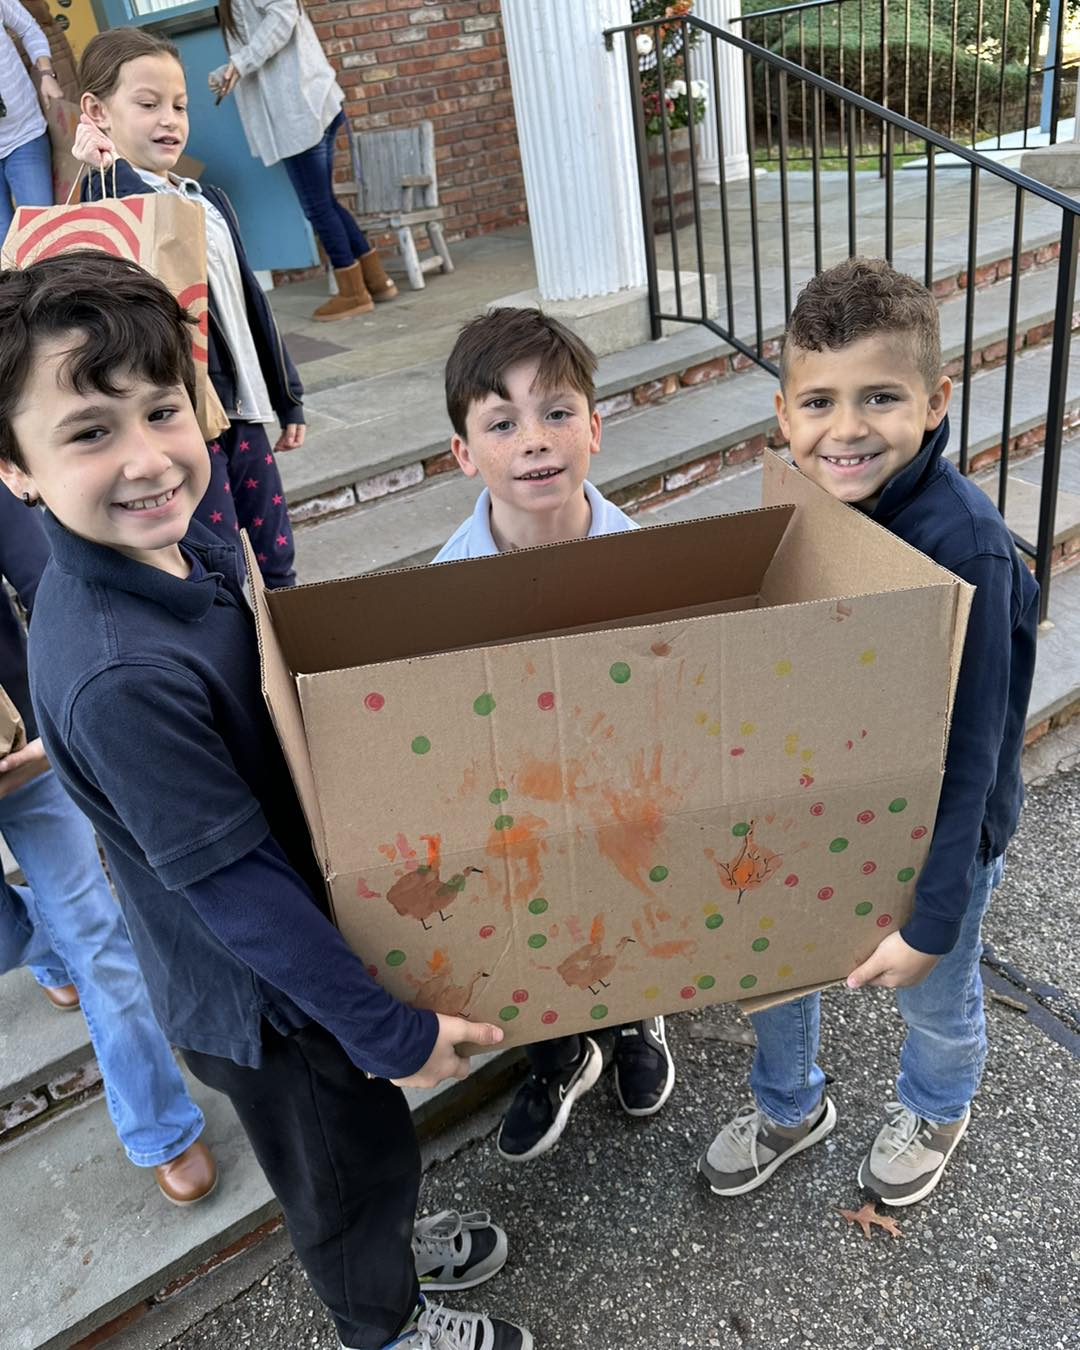 Three young boys are holding a cardboard box in front of a building.